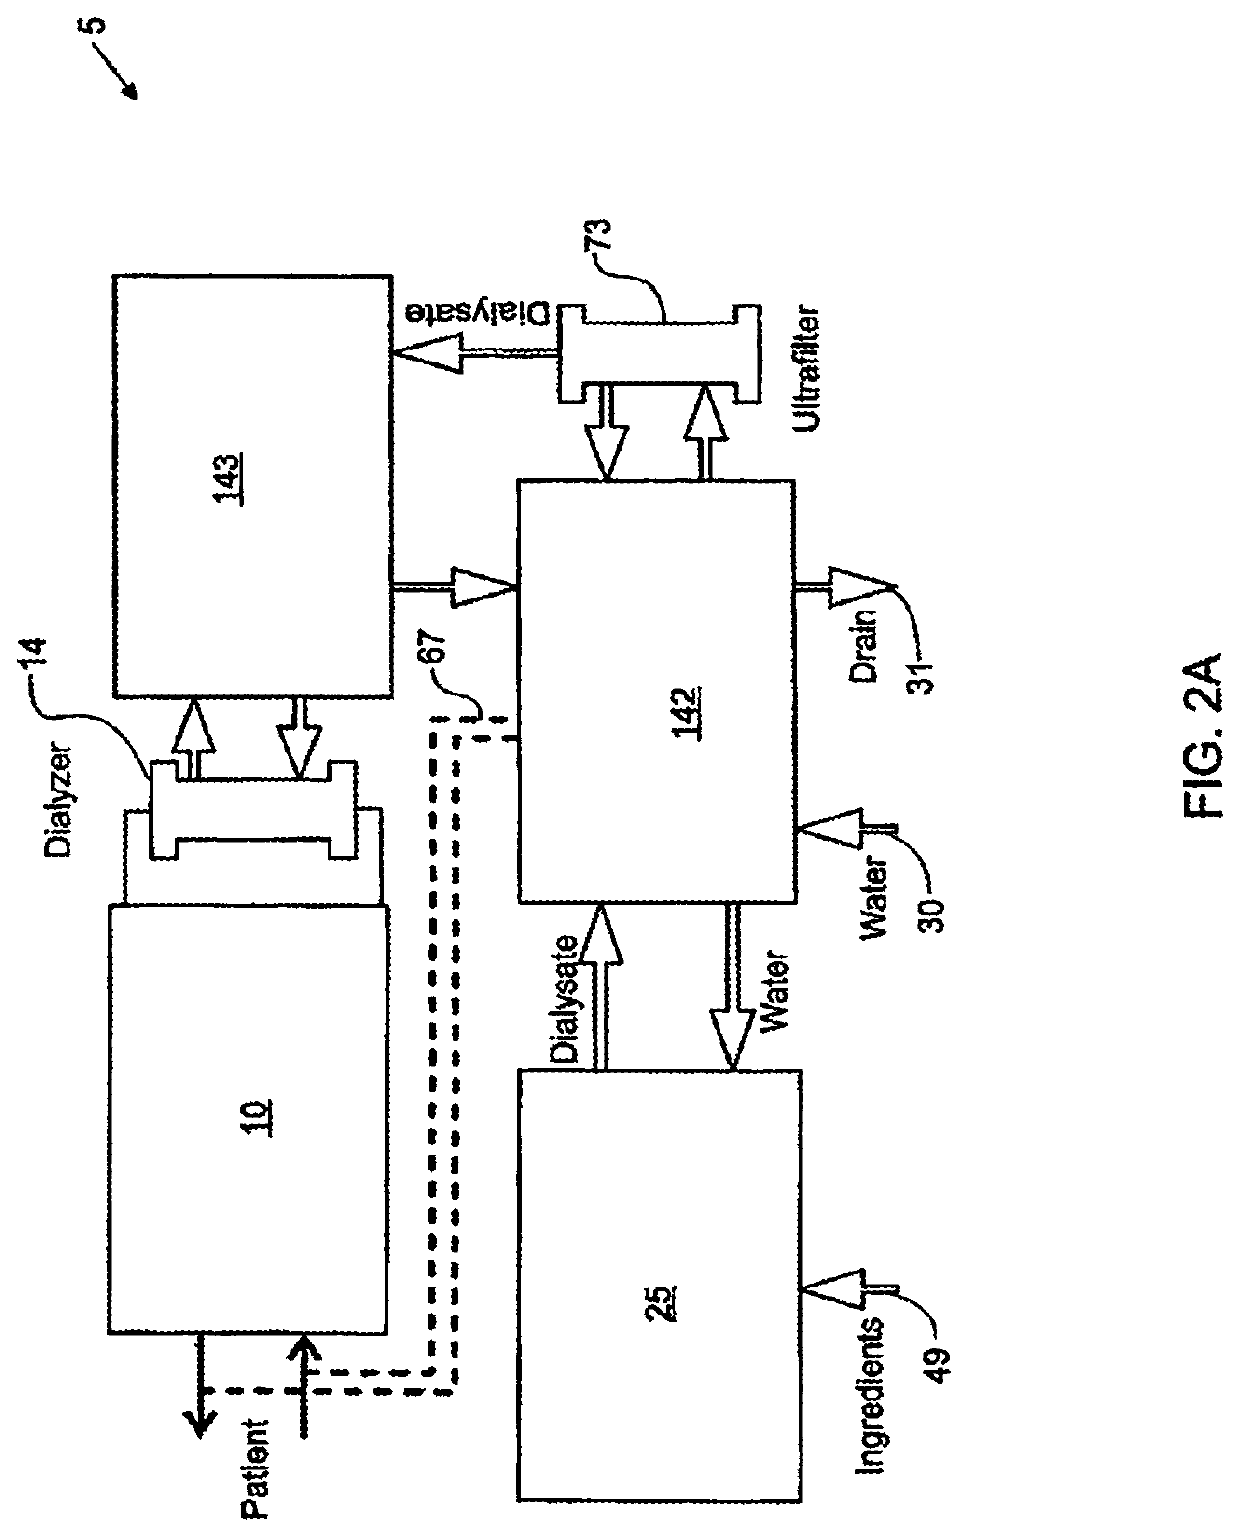 Automated control mechanisms in a hemodialysis apparatus